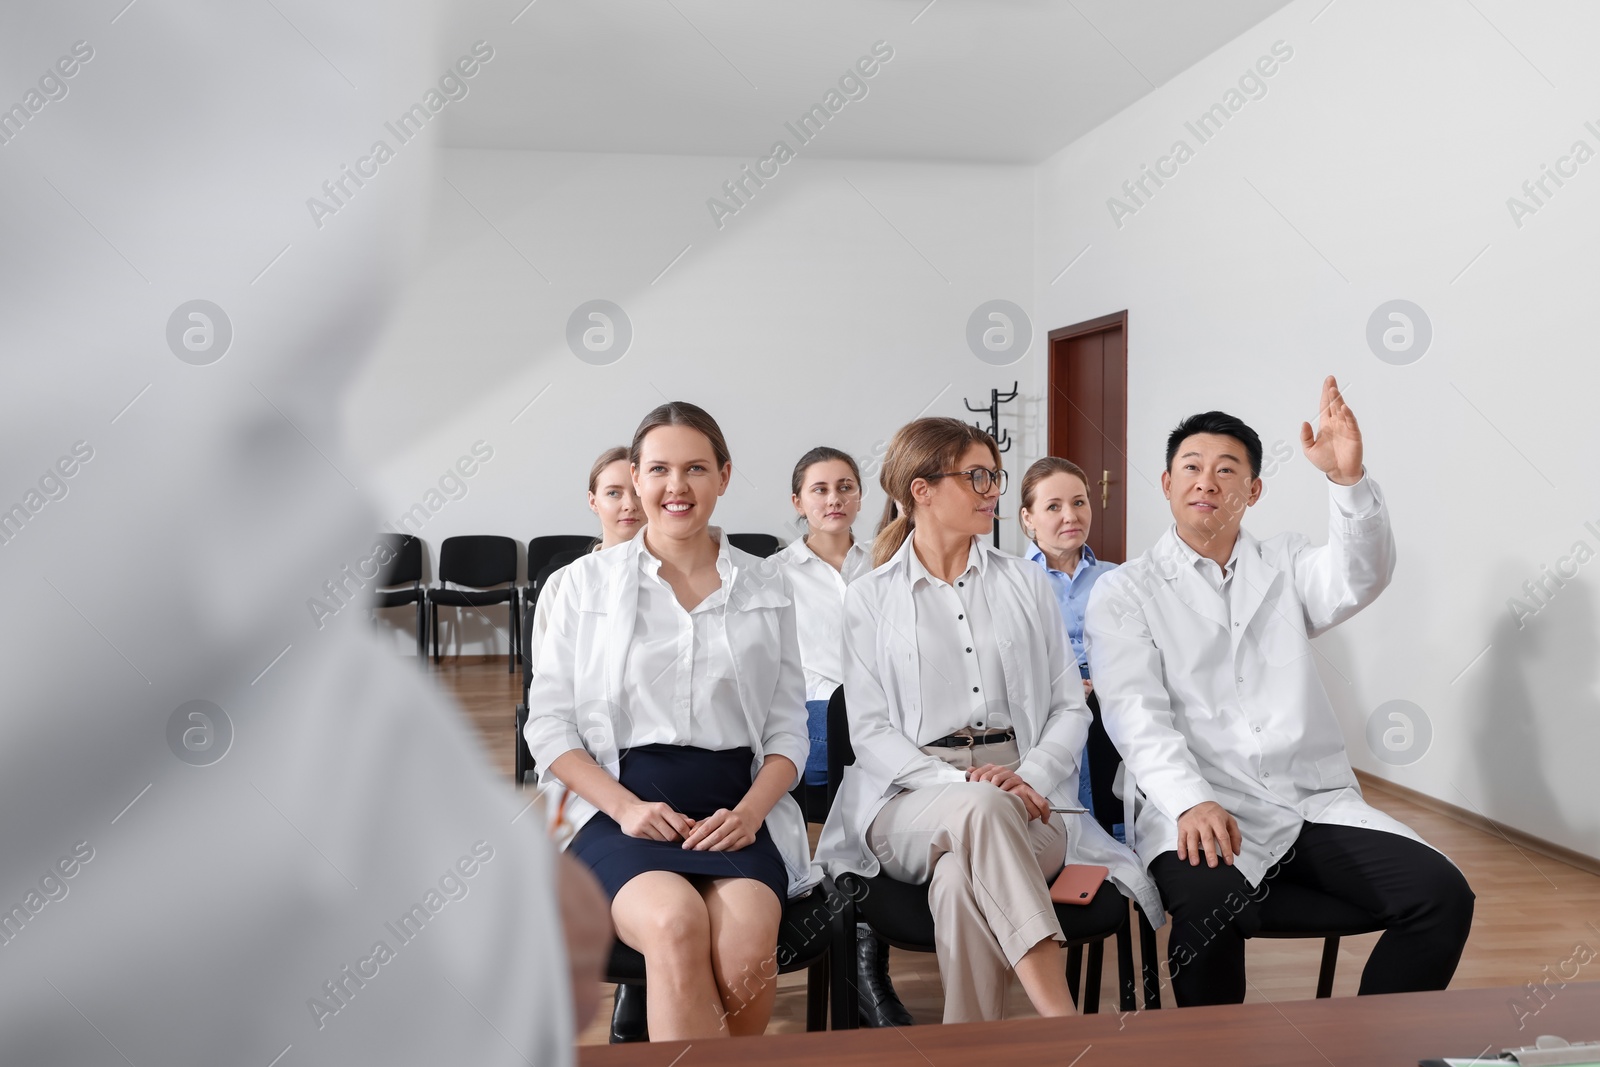 Photo of Team of doctors on medical conference in meeting room